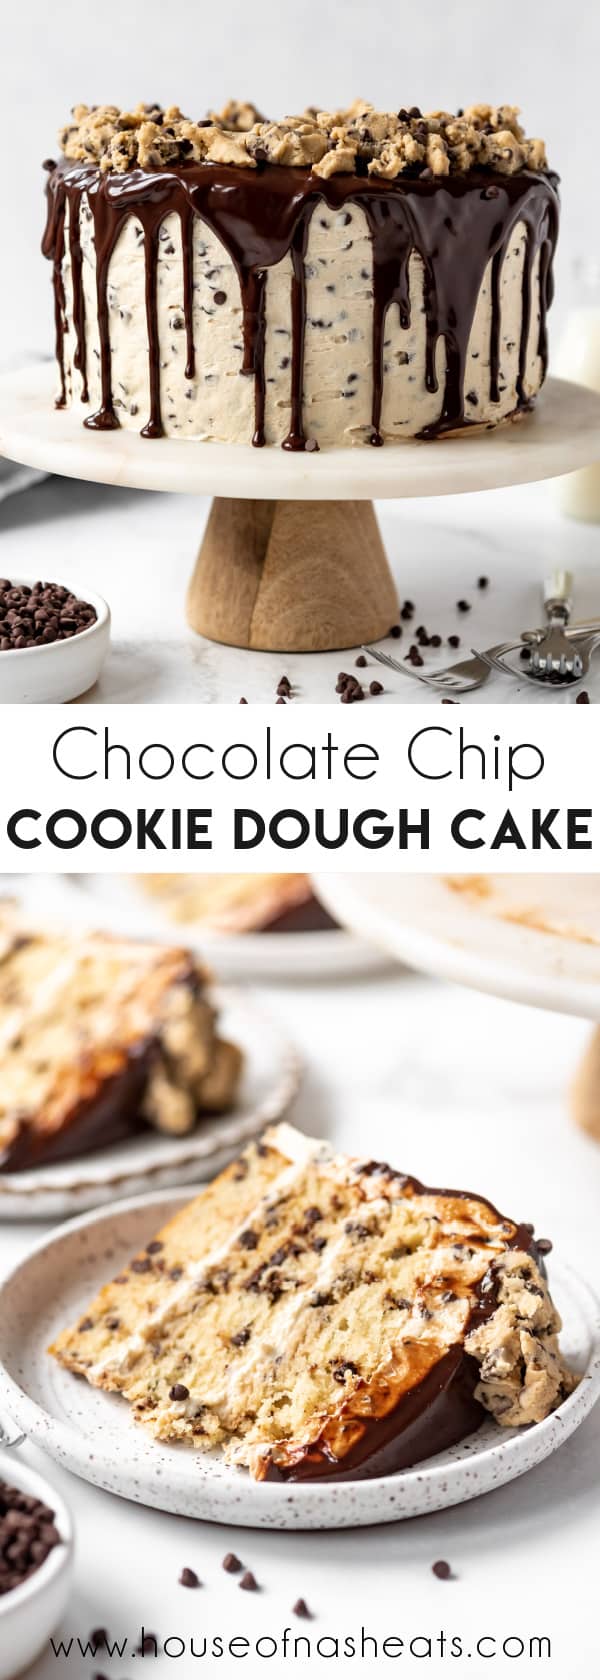 A collage of images of chocolate chip cookie dough cake with text overlay.